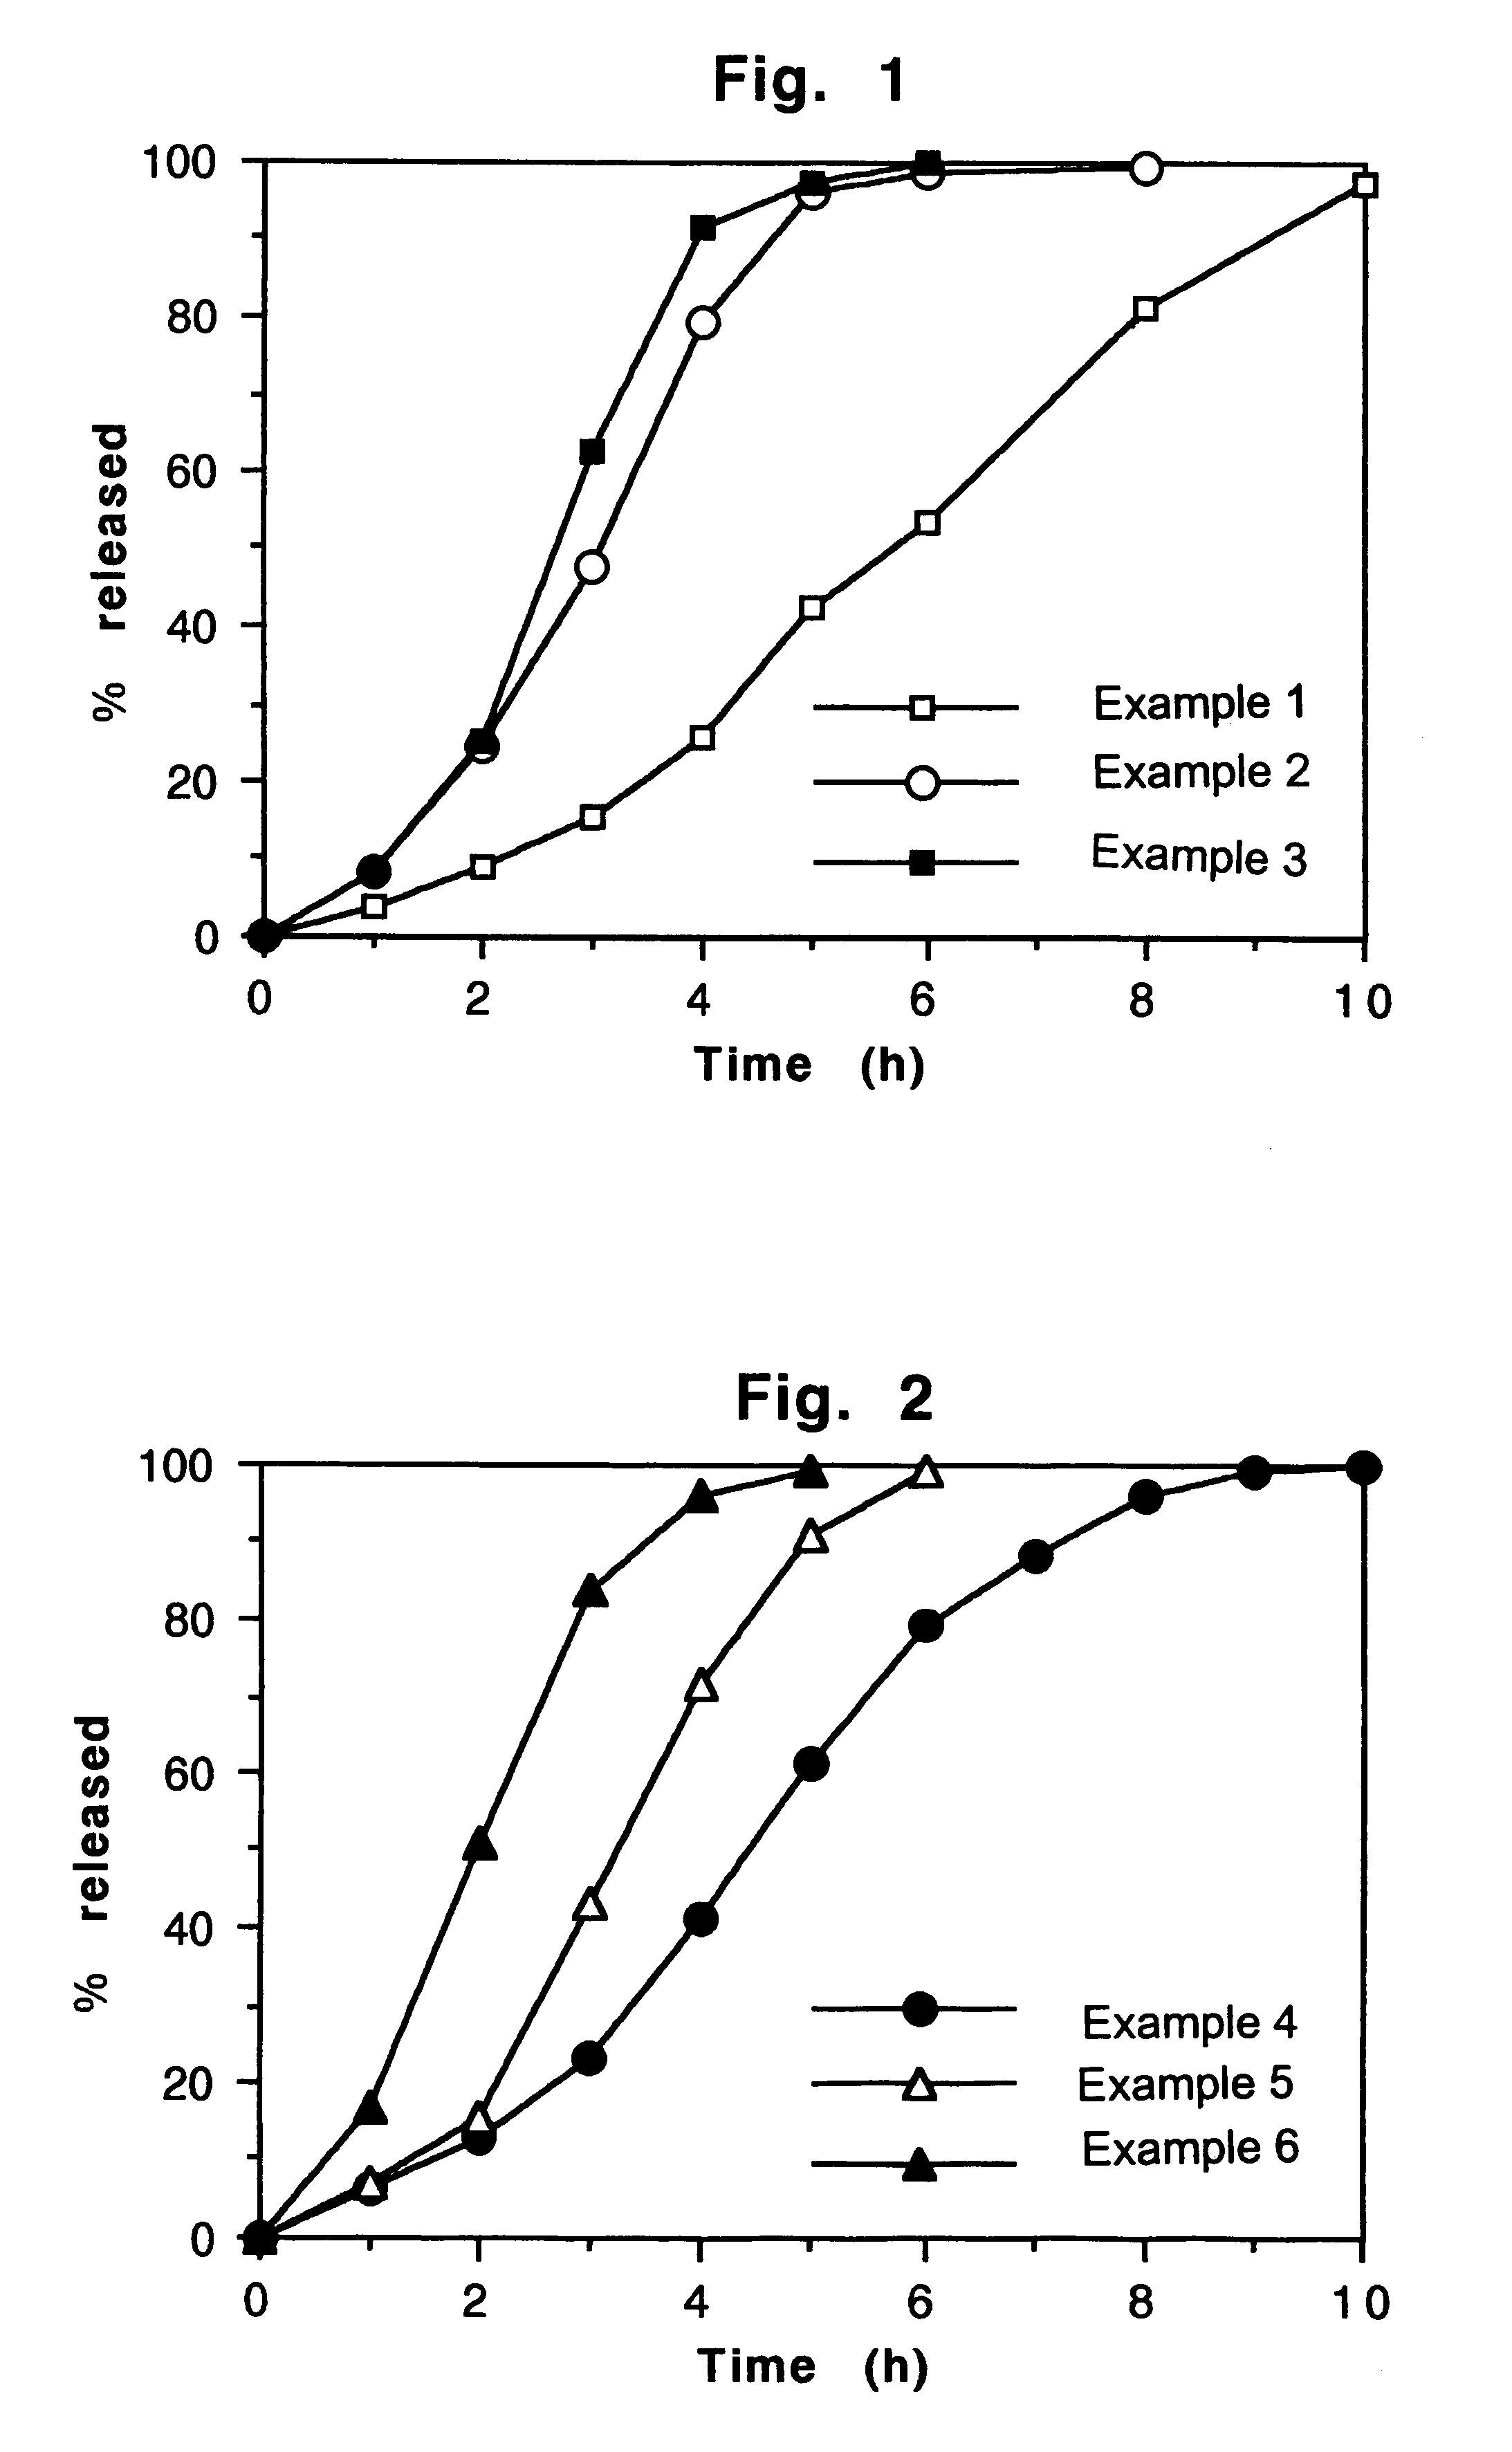 Controlled release pharmaceutical tablets containing an active principle of low water solubility